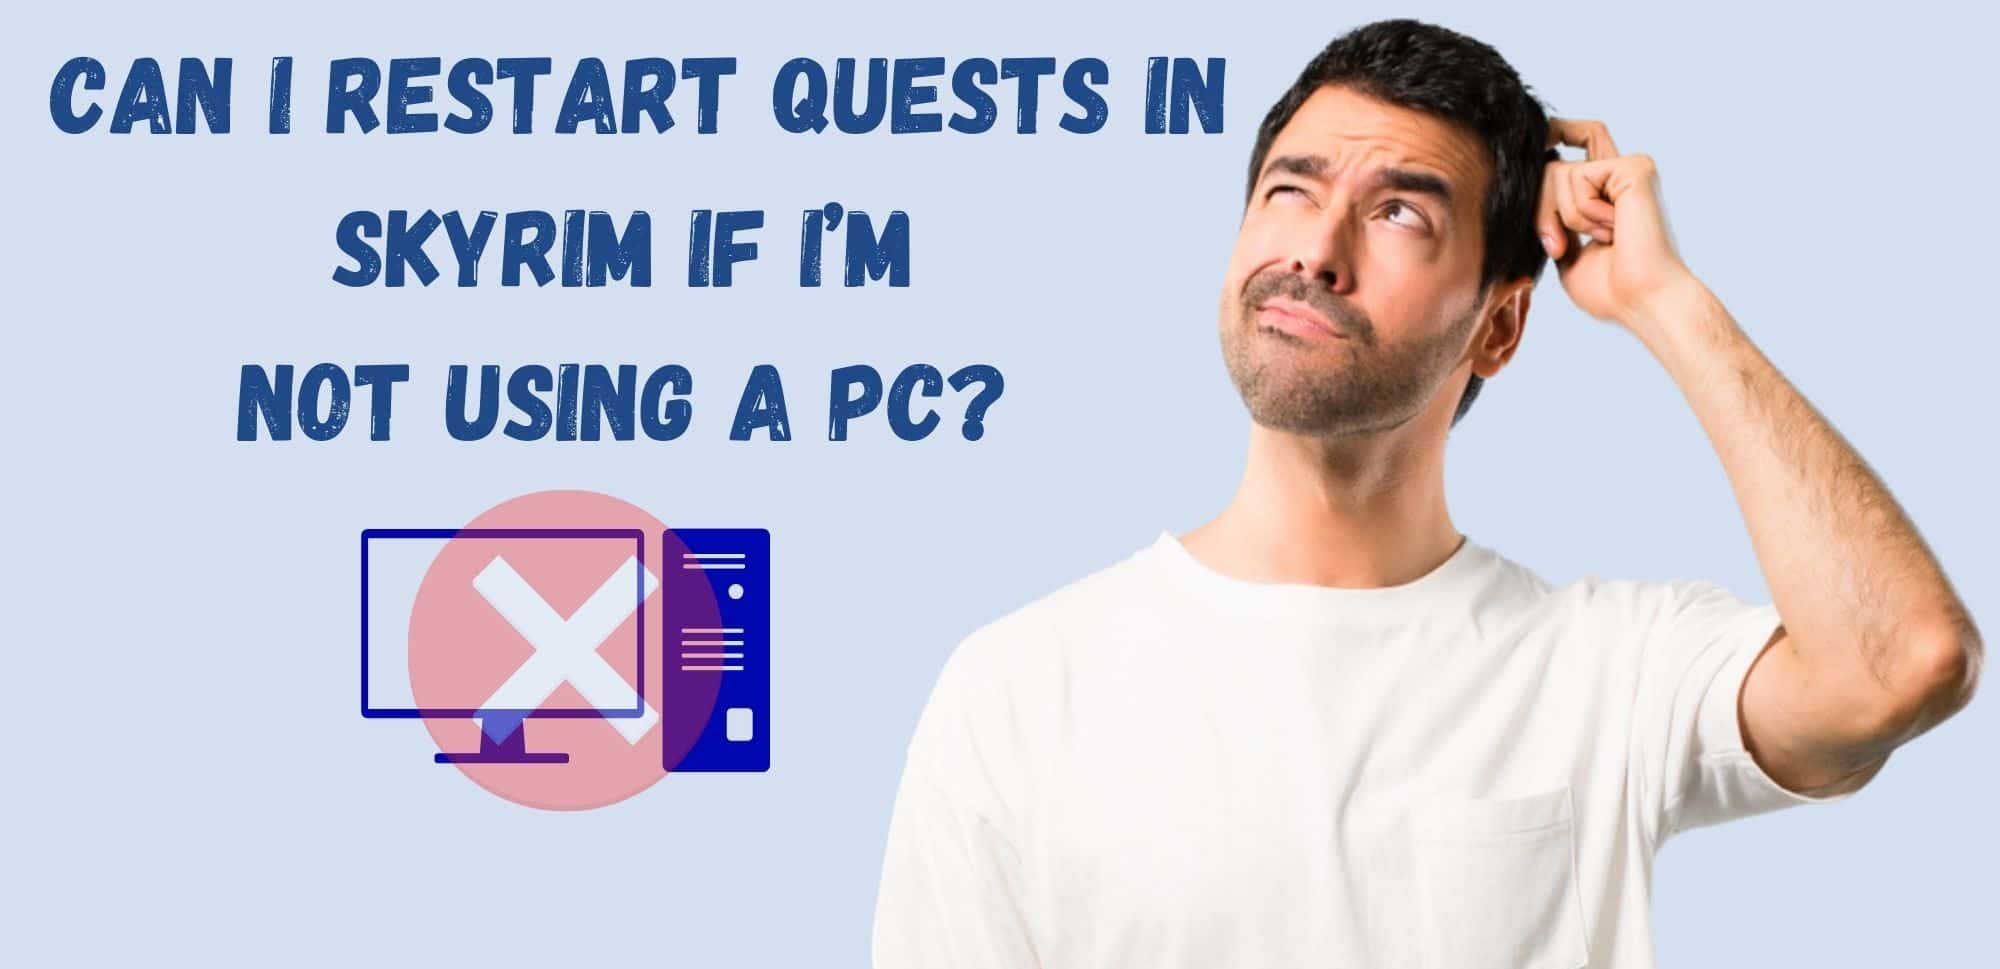 Can I Restart Quests in Skyrim if I’m Not Using a PC